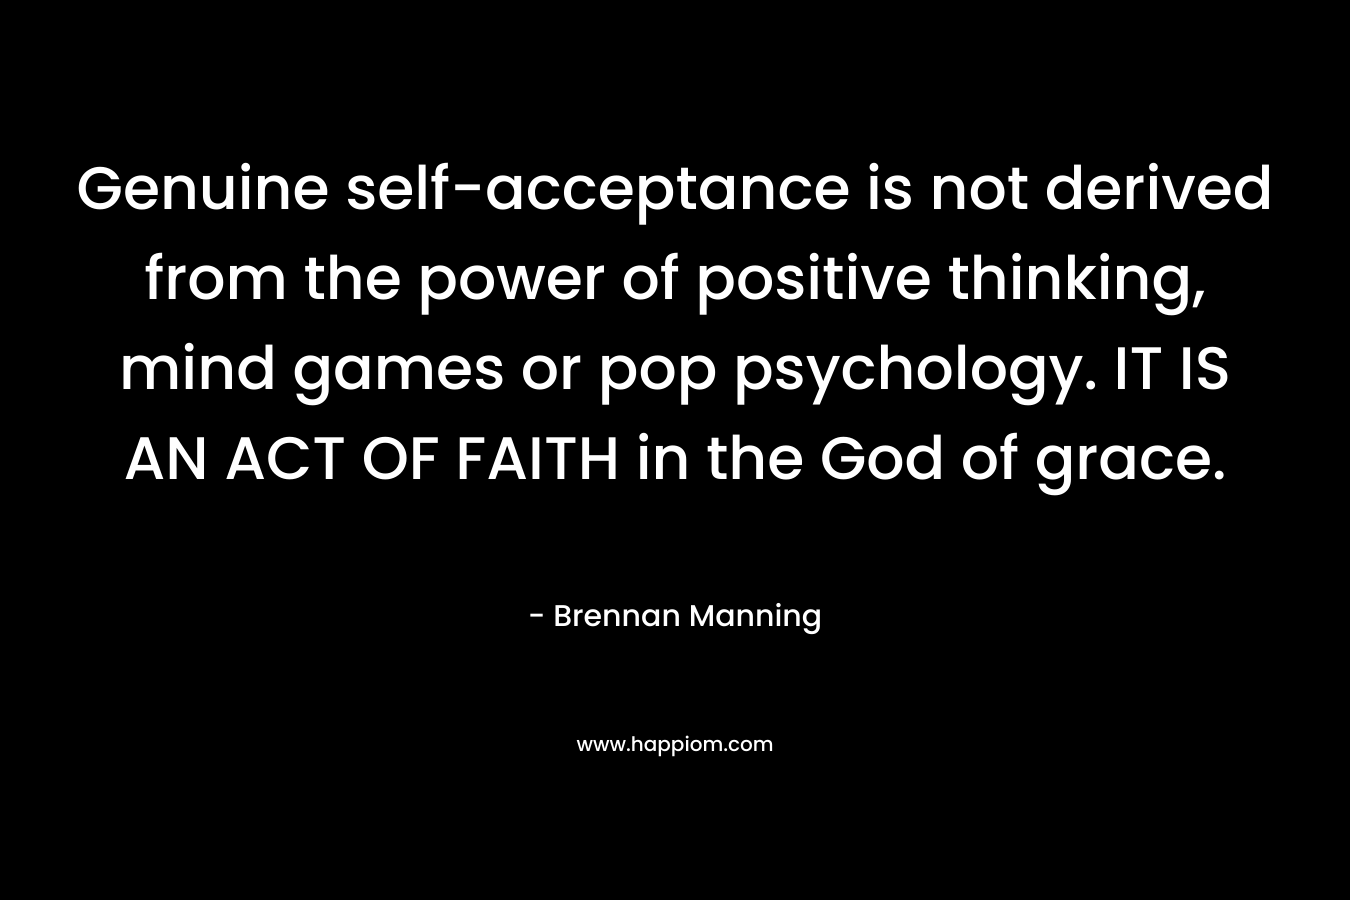 Genuine self-acceptance is not derived from the power of positive thinking, mind games or pop psychology. IT IS AN ACT OF FAITH in the God of grace. – Brennan Manning